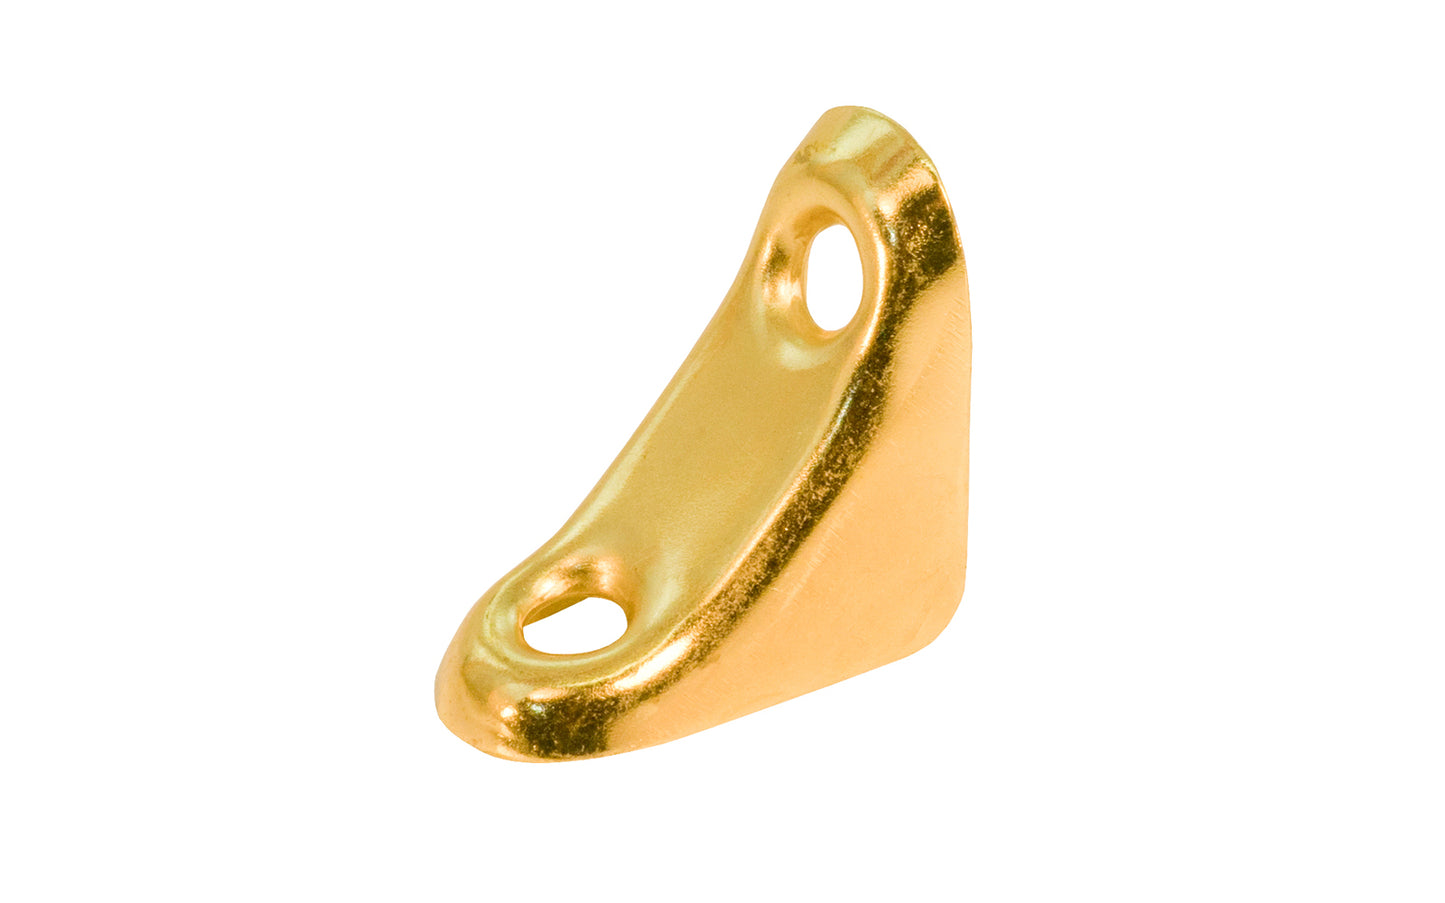 Brass Finish Chair Braces with smooth rounded edges. Excellent for many applications including chairs, tables, angle joints, shelves, cabinets, etc. Made of steel material with a brass finish. Sold as single brace. 